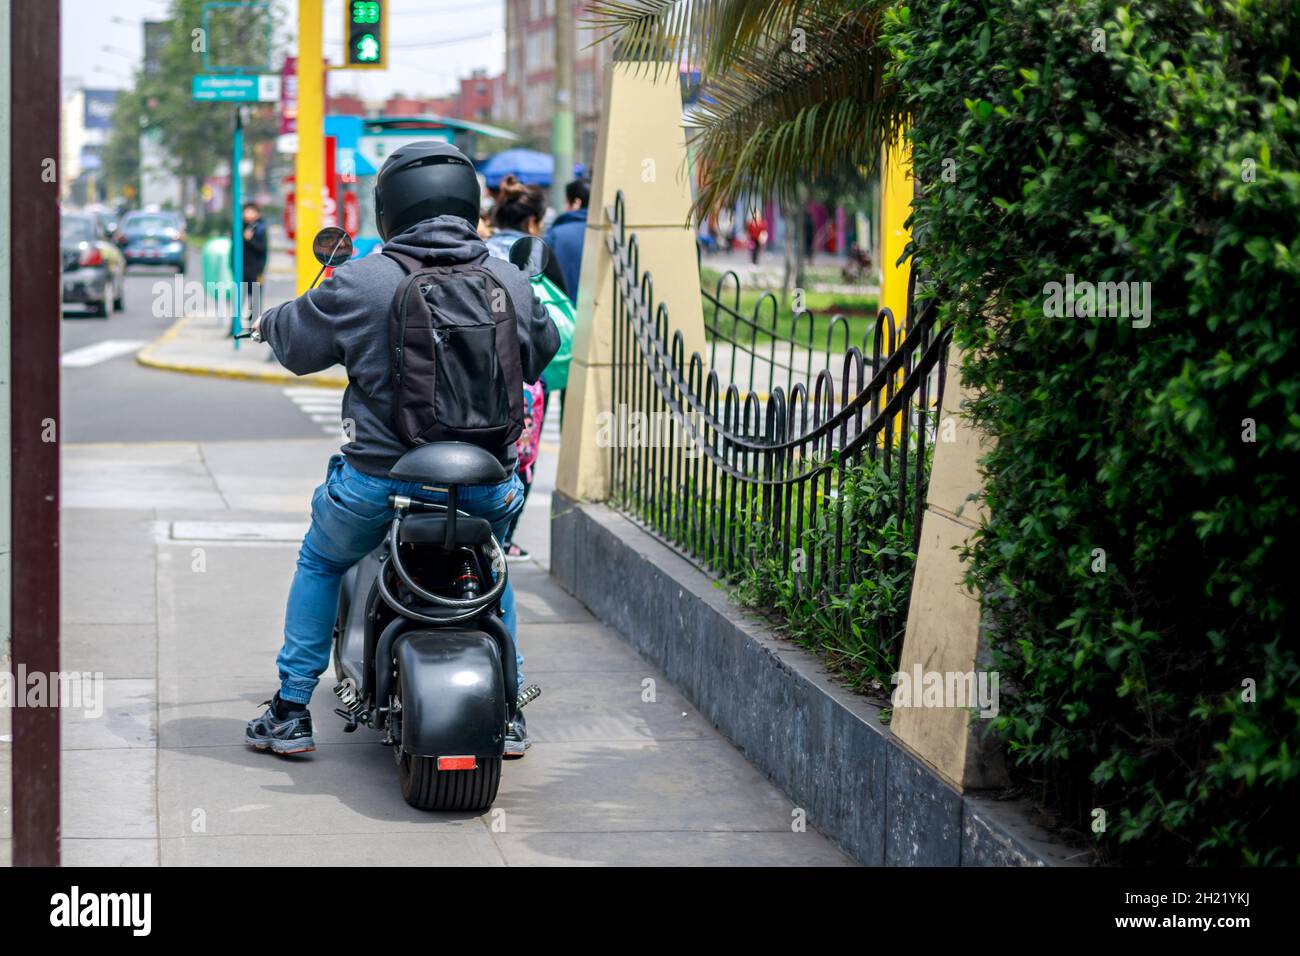 A person riding an electrical motorcycle on a city sidewalk during daytime. Stock Photo